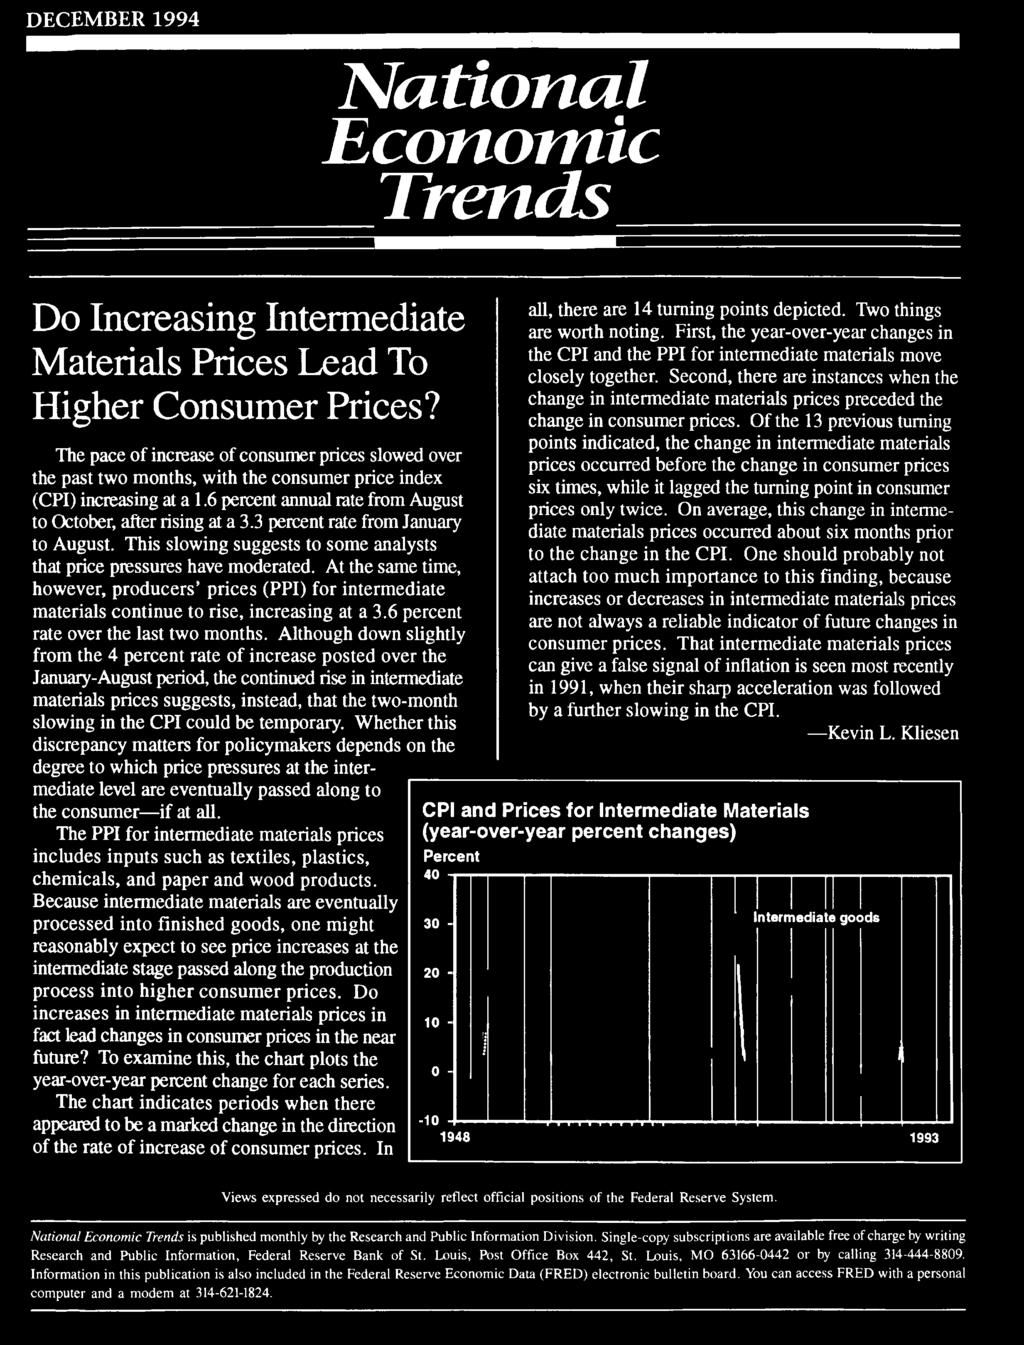 Information in this publication is also included in the Federal Reserve Economic Data (FRED) electronic bulletin board. You can access FRED with a personal computer and a modem at 314-621-1824.